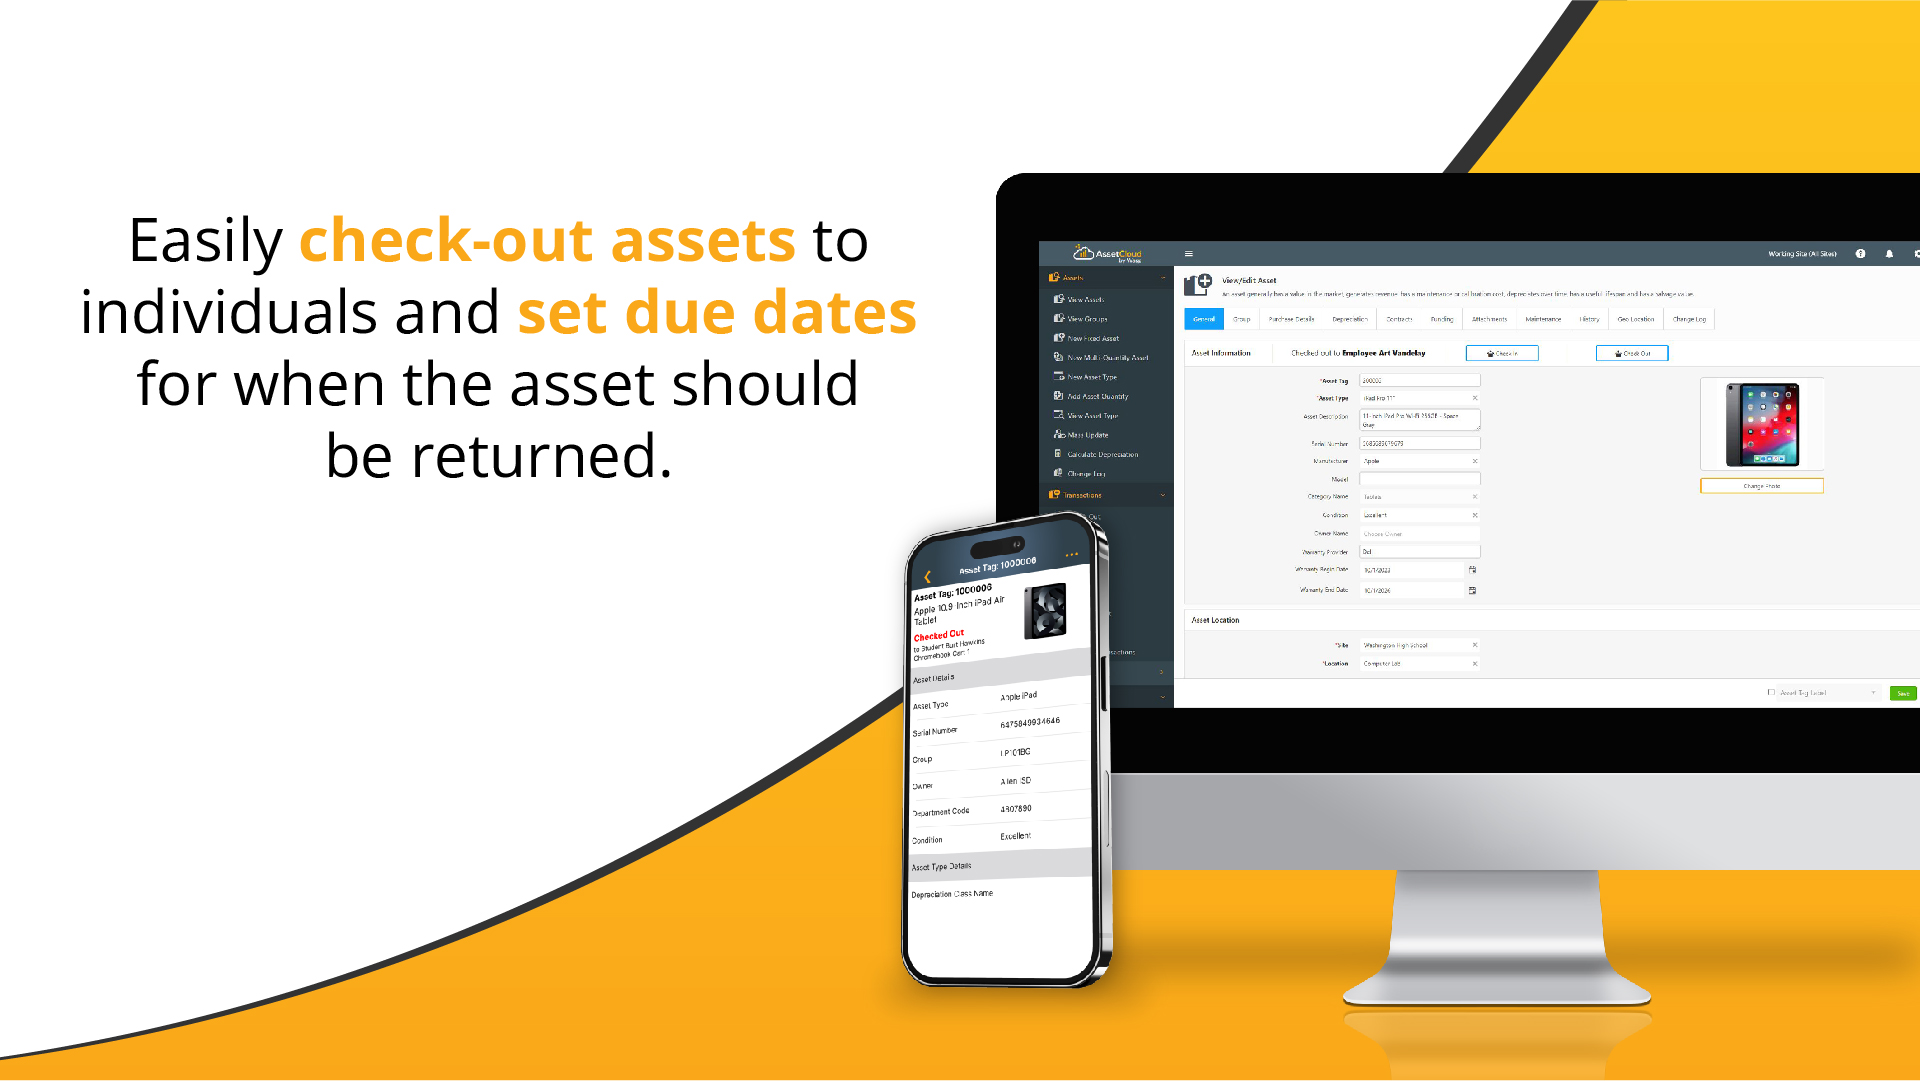 Easily check-out assets to individuals and set due dates for when the assets should be returned